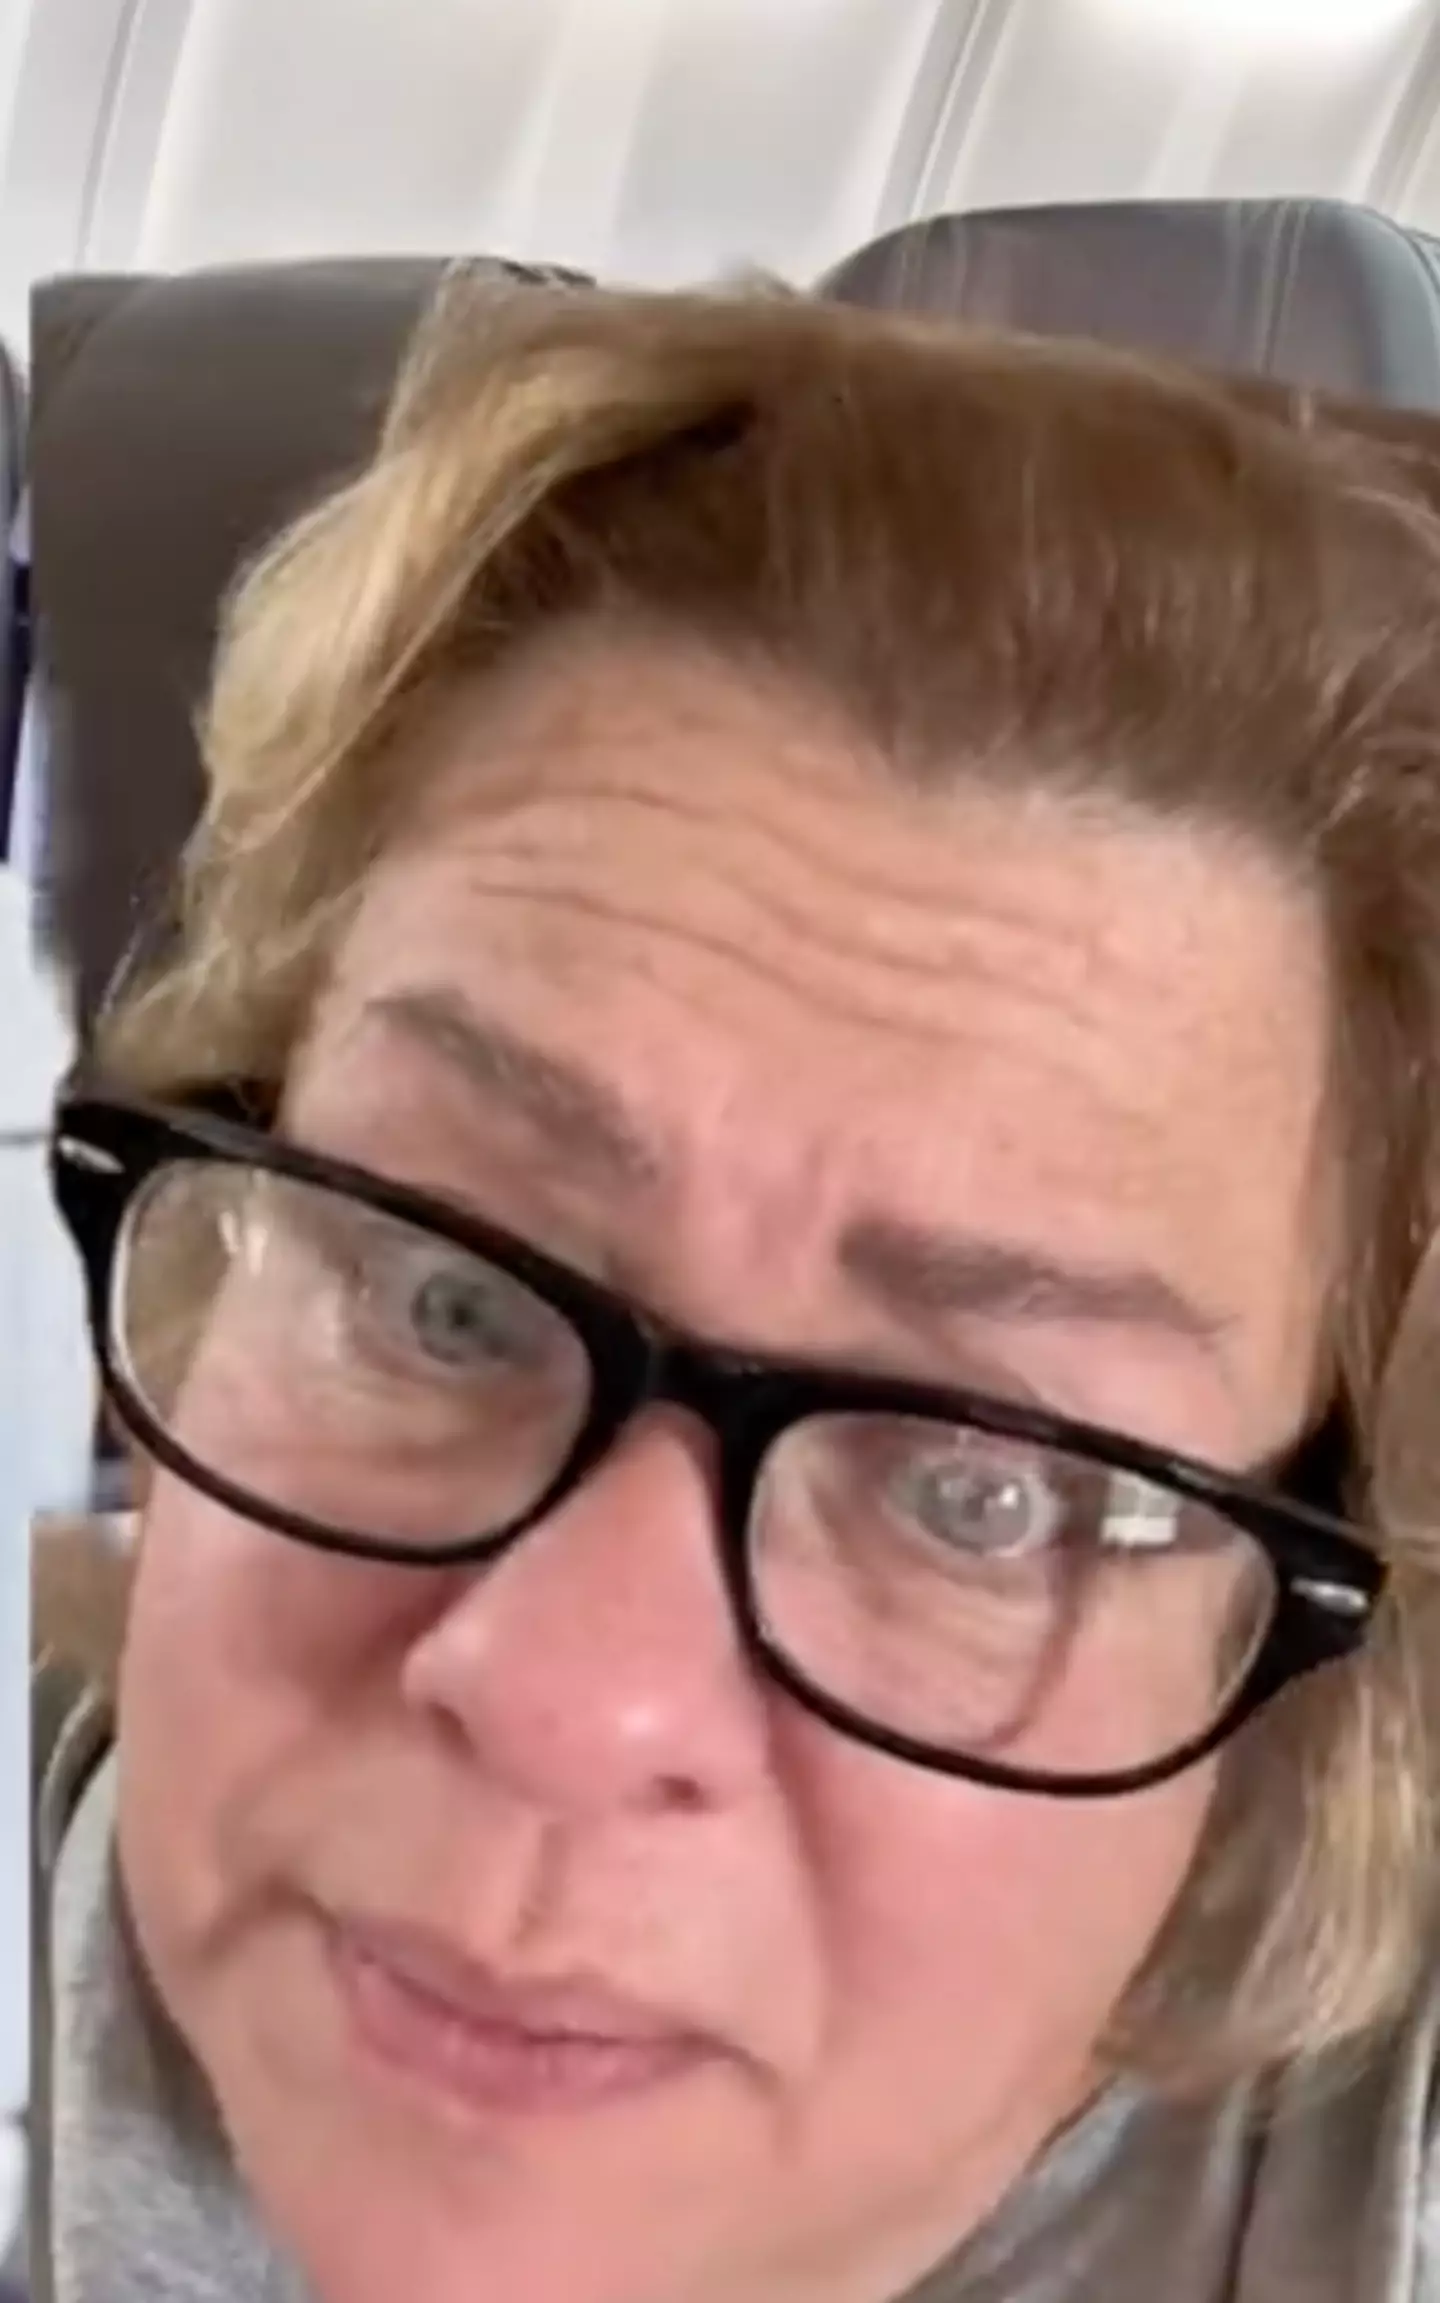 The woman has gone viral on TikTok for her slightly alternative parenting decision.